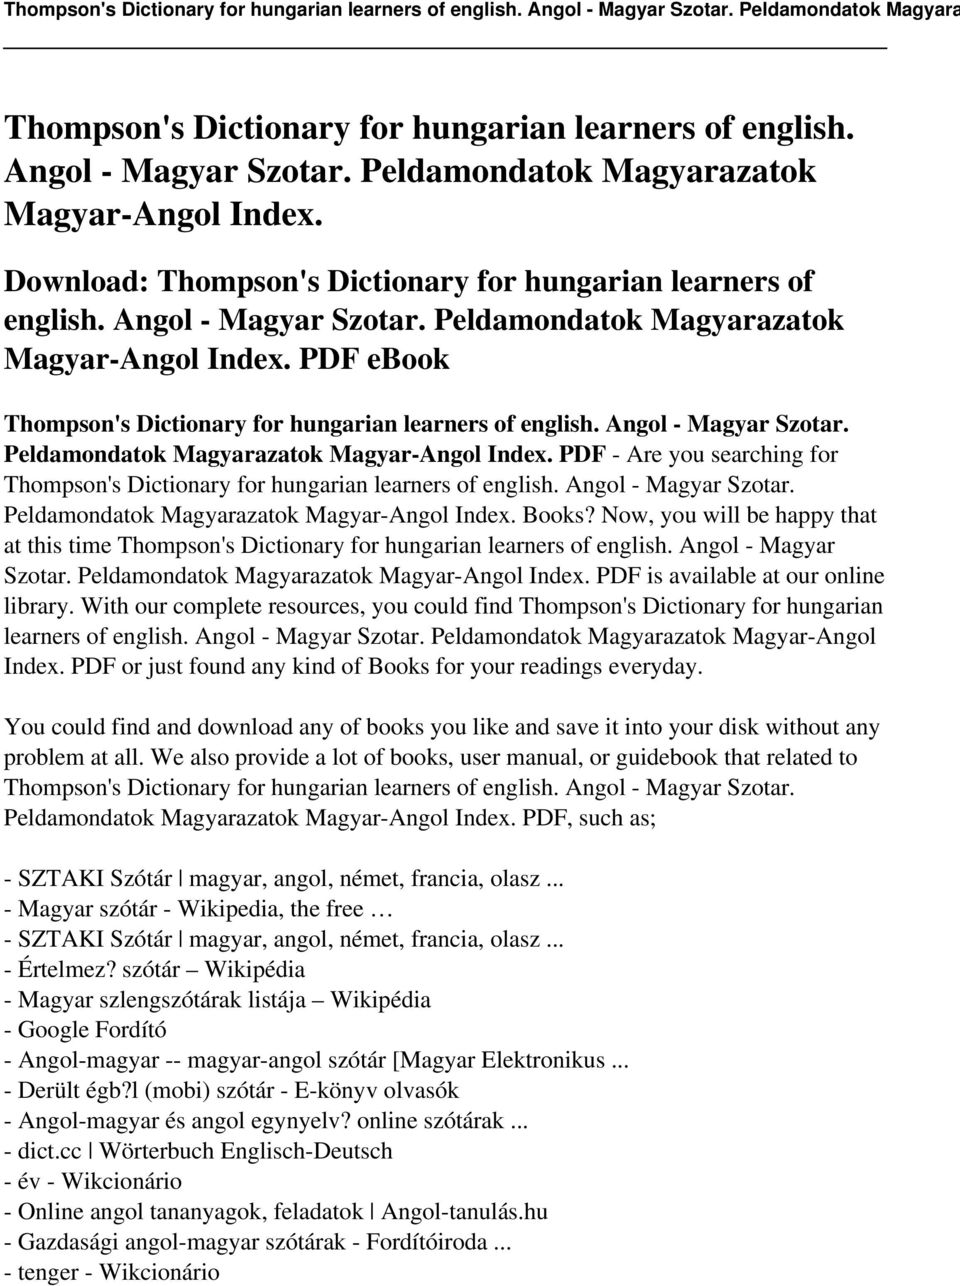 Peldamondatok Magyarazatok Magyar-Angol Index. PDF - Are you searching for Thompson's Dictionary for hungarian learners of english. Angol - Magyar Szotar.